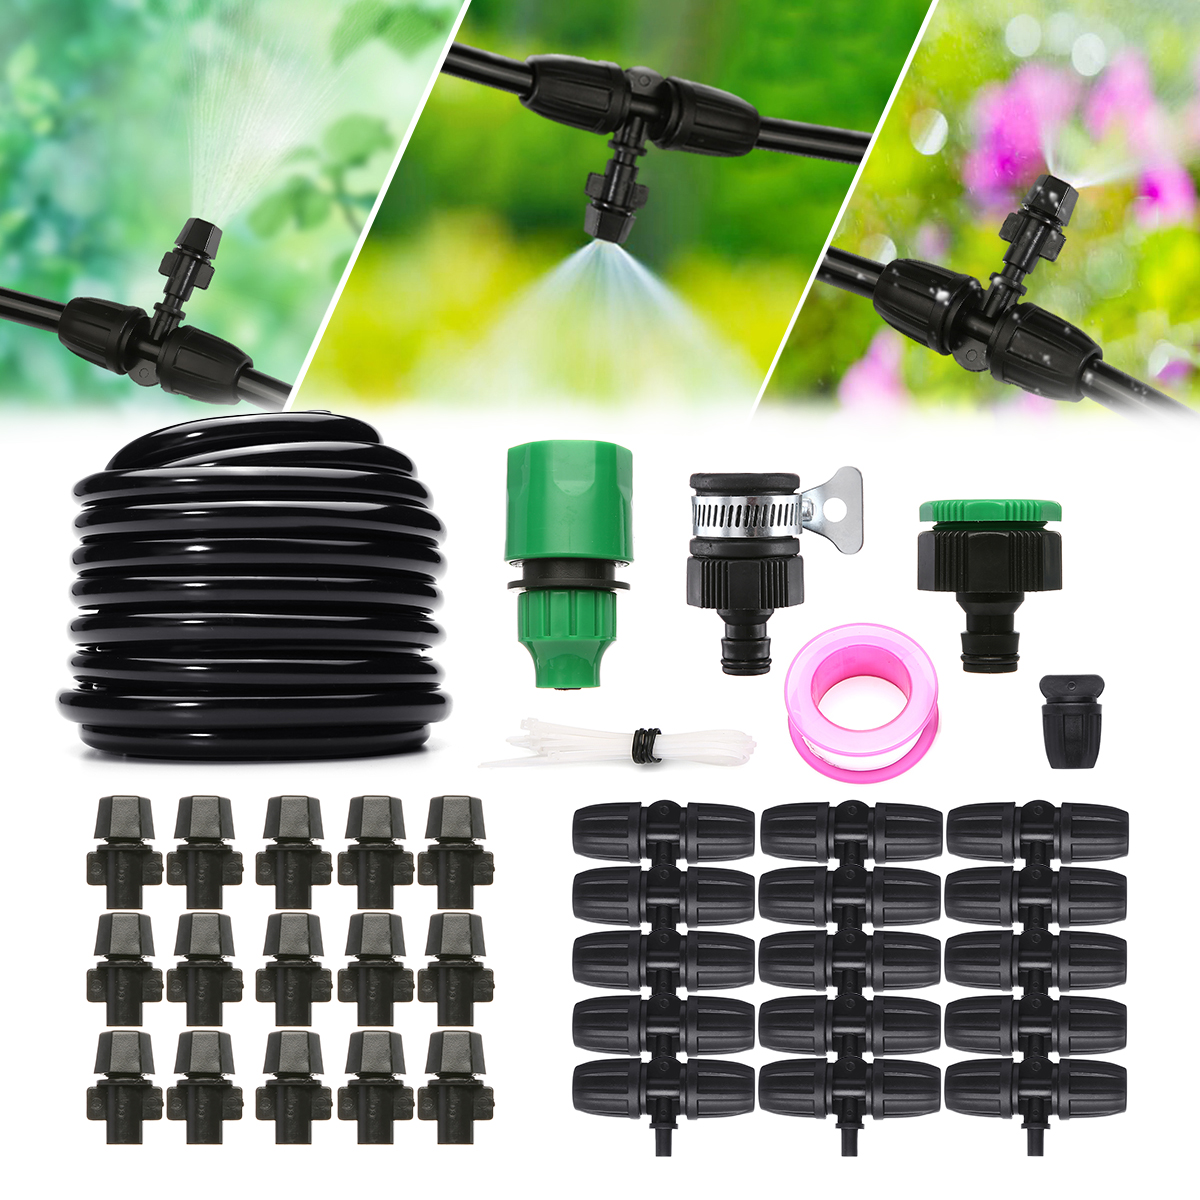 

10M Drip Irrigation Kit Garden Misting Cooling System 32.8ft Blank Distribution Tubing Hose for Garden Greenhouse Flower Bed Patio Lawn